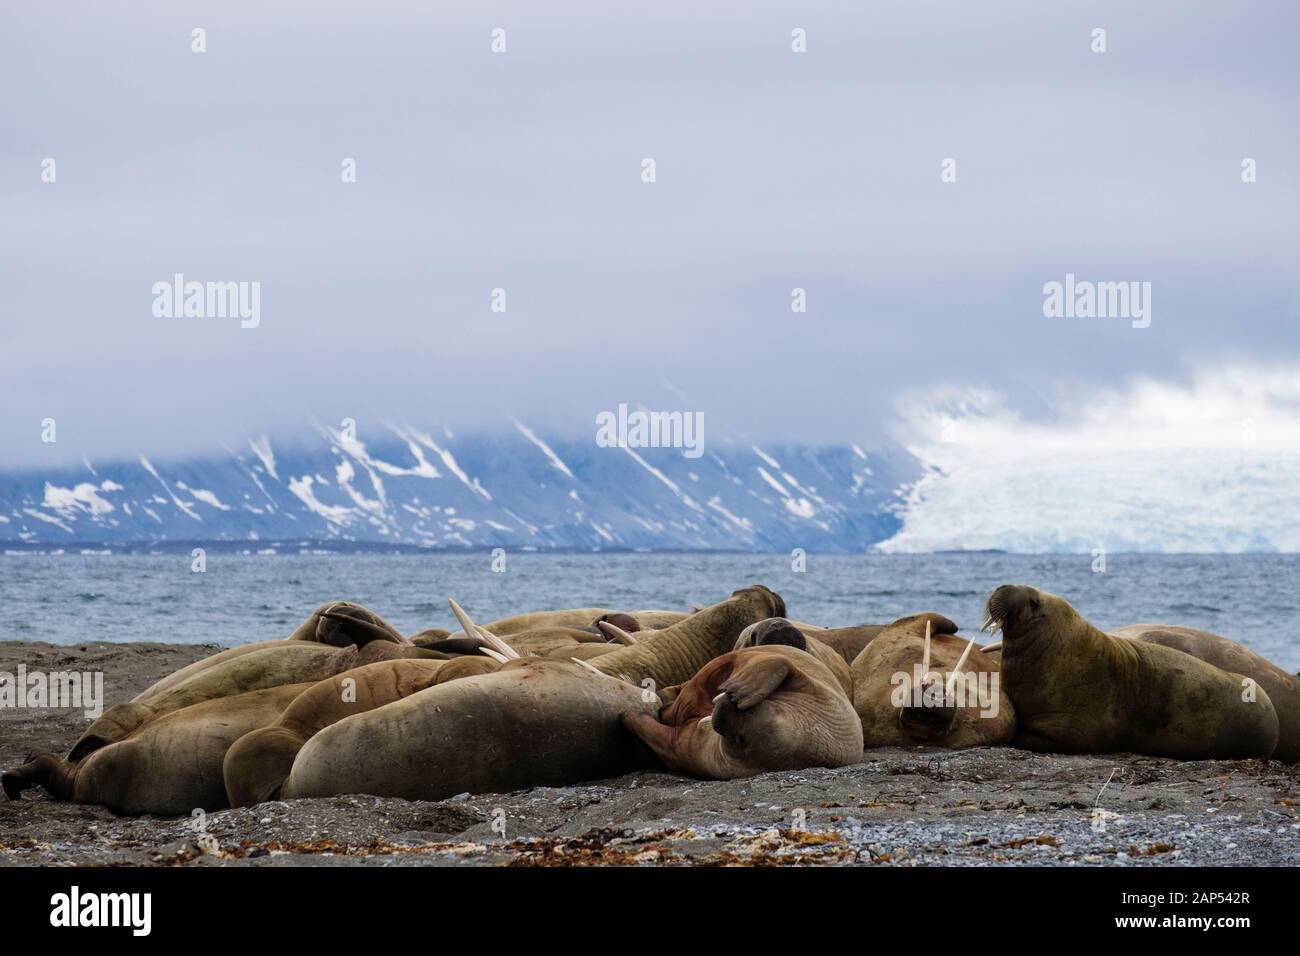 Group of Walruses (Odobenus rosmarus) adults hauled out to rest on dry land on Arctic coast in summer. Spitsbergen island Svalbard archipelago Norway Stock Photo